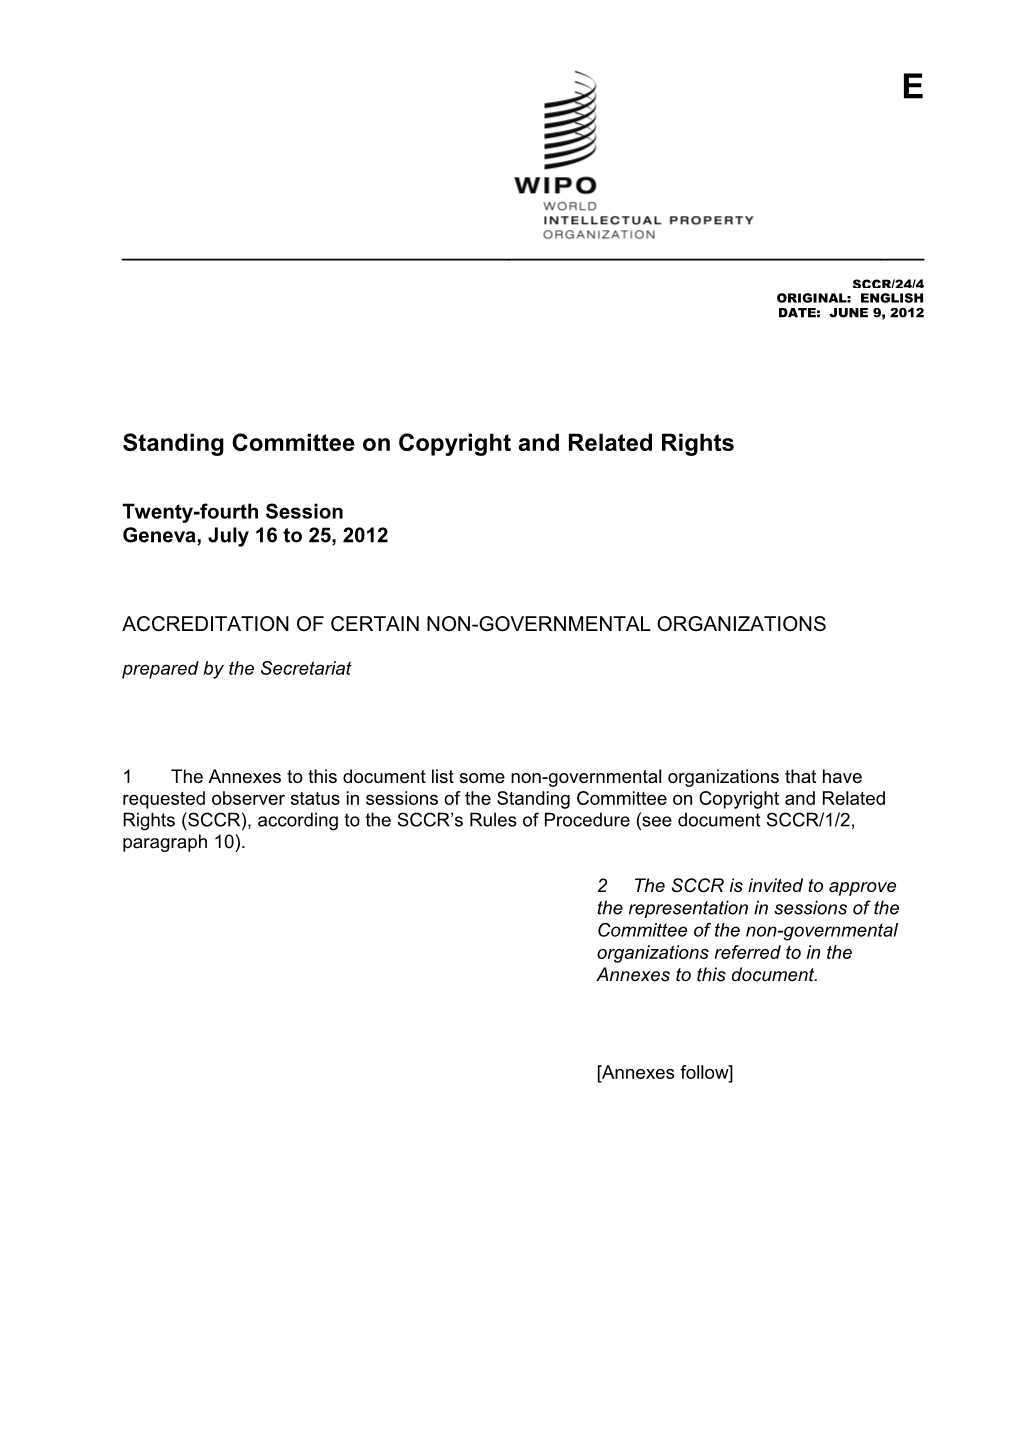 Standing Committee on Copyright and Related Rights s1